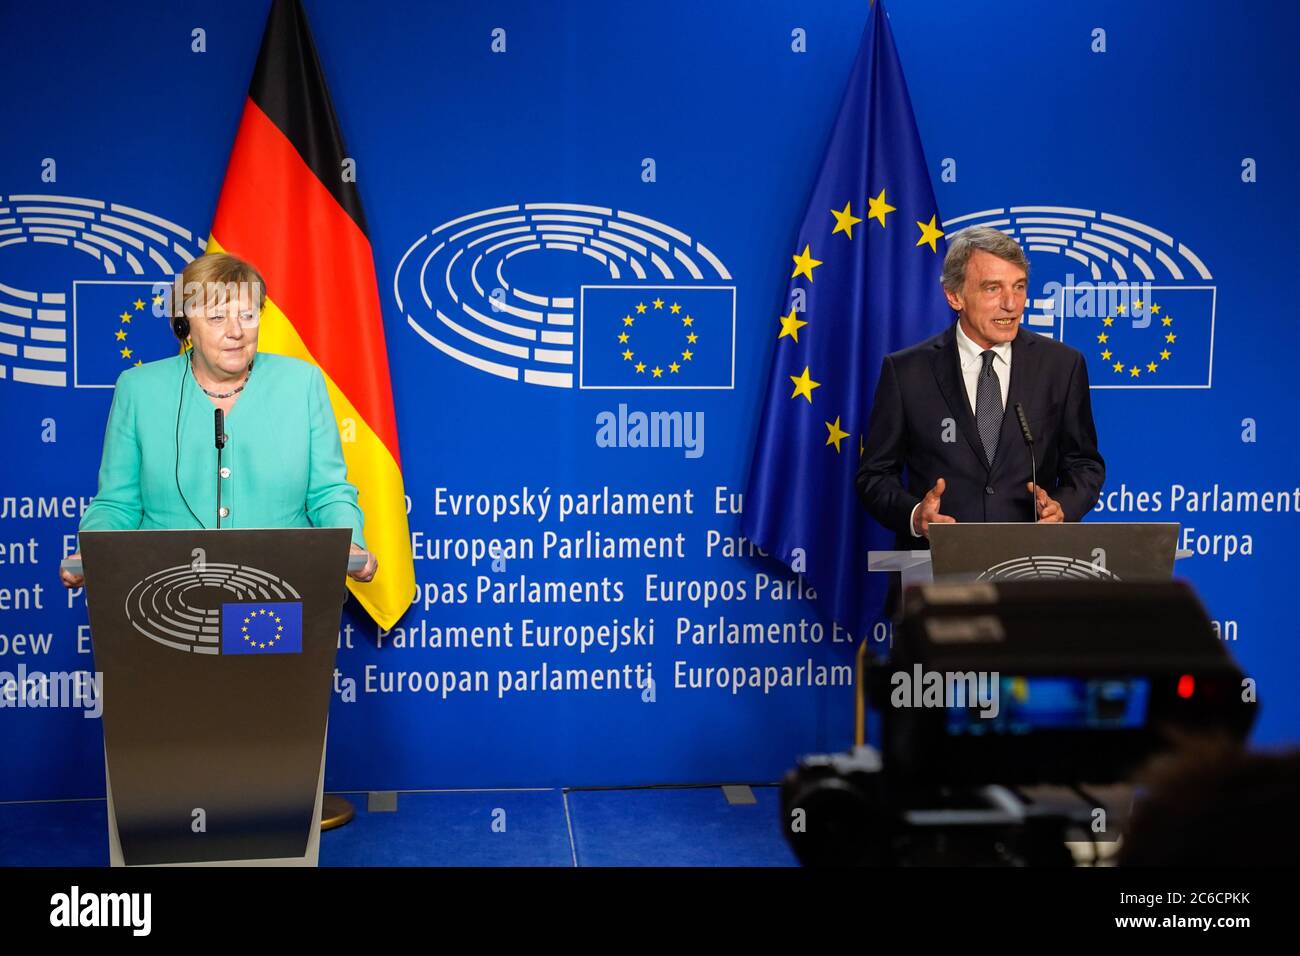 (200709) -- BRUSSELS, July 9, 2020 (Xinhua) -- German Chancellor Angela Merkel (L) and European Parliament President David Sassoli attend a press conference at the European Parliament in Brussels, Belgium, July 8, 2020. Reaching swiftly an agreement on an ambitious European recovery package is the European Union's highest priority for the coming weeks, the bloc's leaders agreed at a meeting Wednesday with German Chancellor Angela Merkel. Germany took over the rotating Presidency of the Council of the EU on July 1. (European Union/Handout via Xinhua) Stock Photo